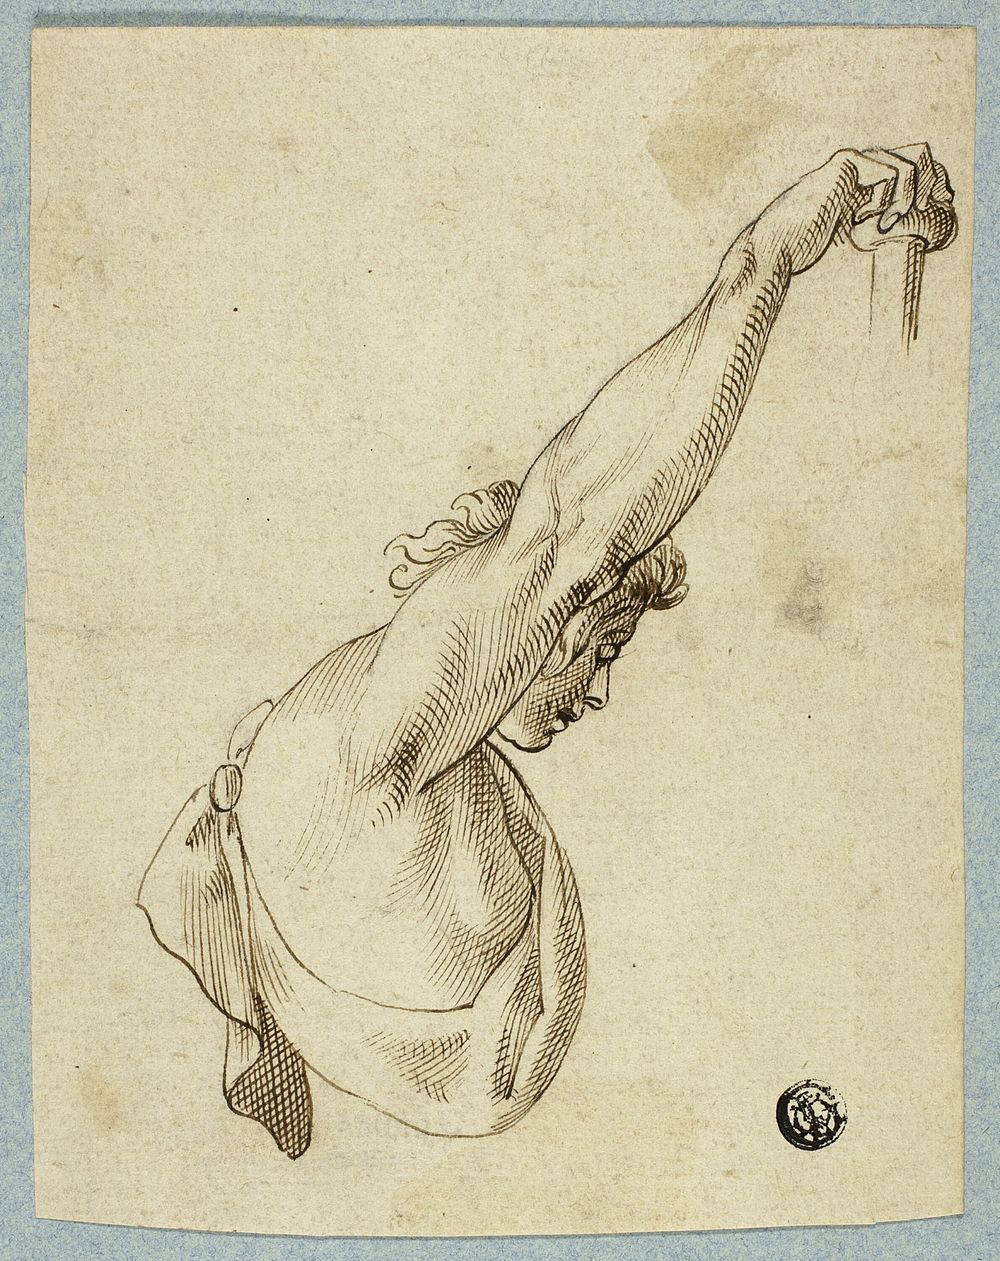 Upper Torso with Upstretched Arms by Unknown artist